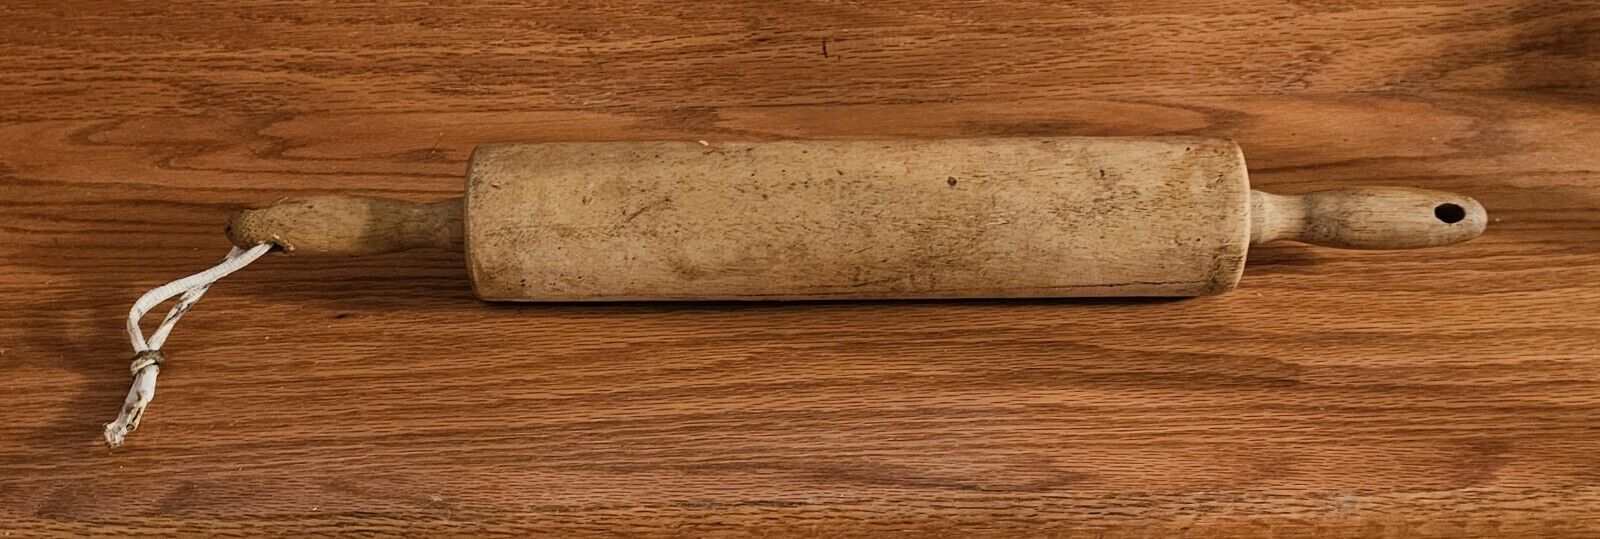 Vintage Wood Rolling Pin Decor Wood Handles Drilled For Hanging Rolls Nicely 